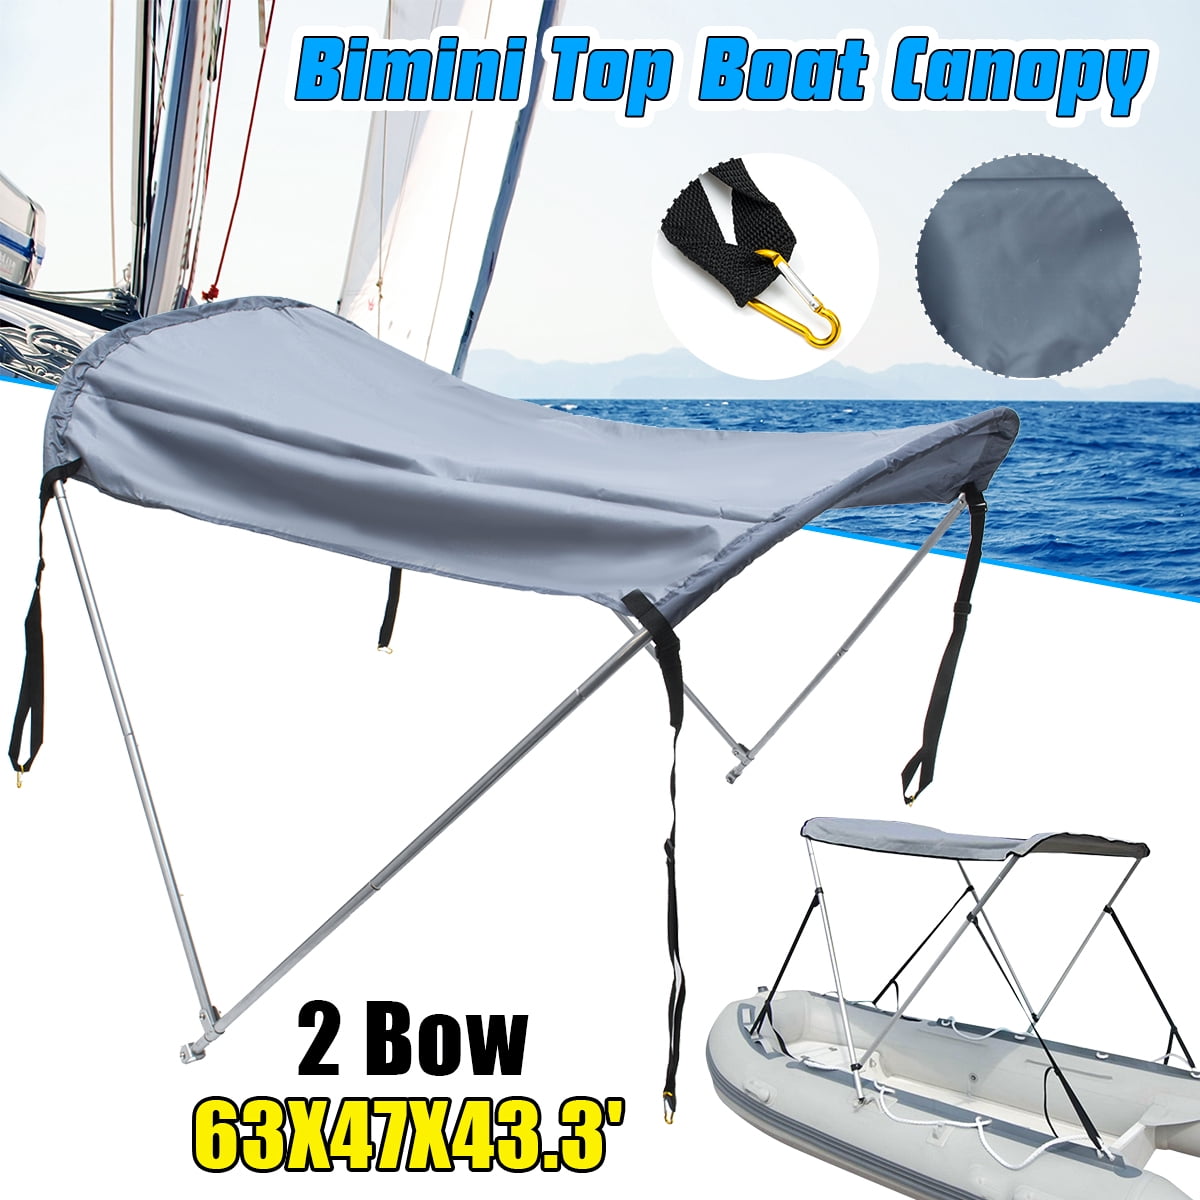 2 Bow Bimini Top Grey 160cm Water Resistant Boat Canopy Canvas Cover 